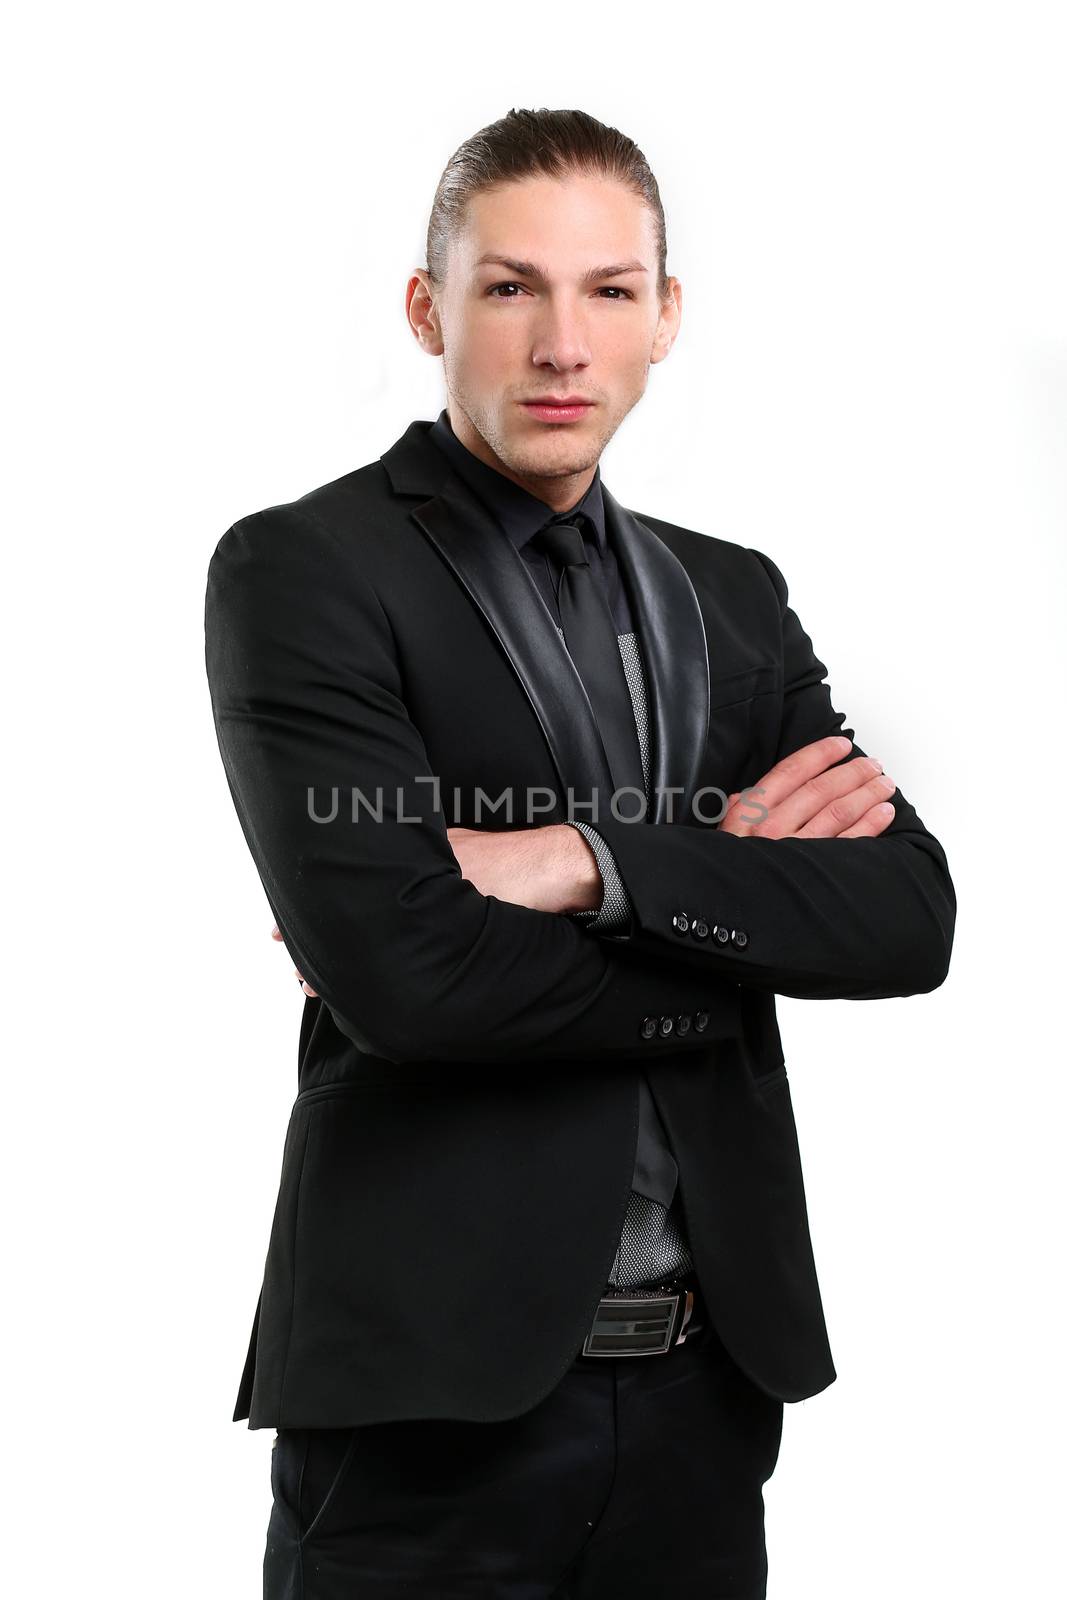 Portrait of a handsome man in a black suit who is posing over a white background